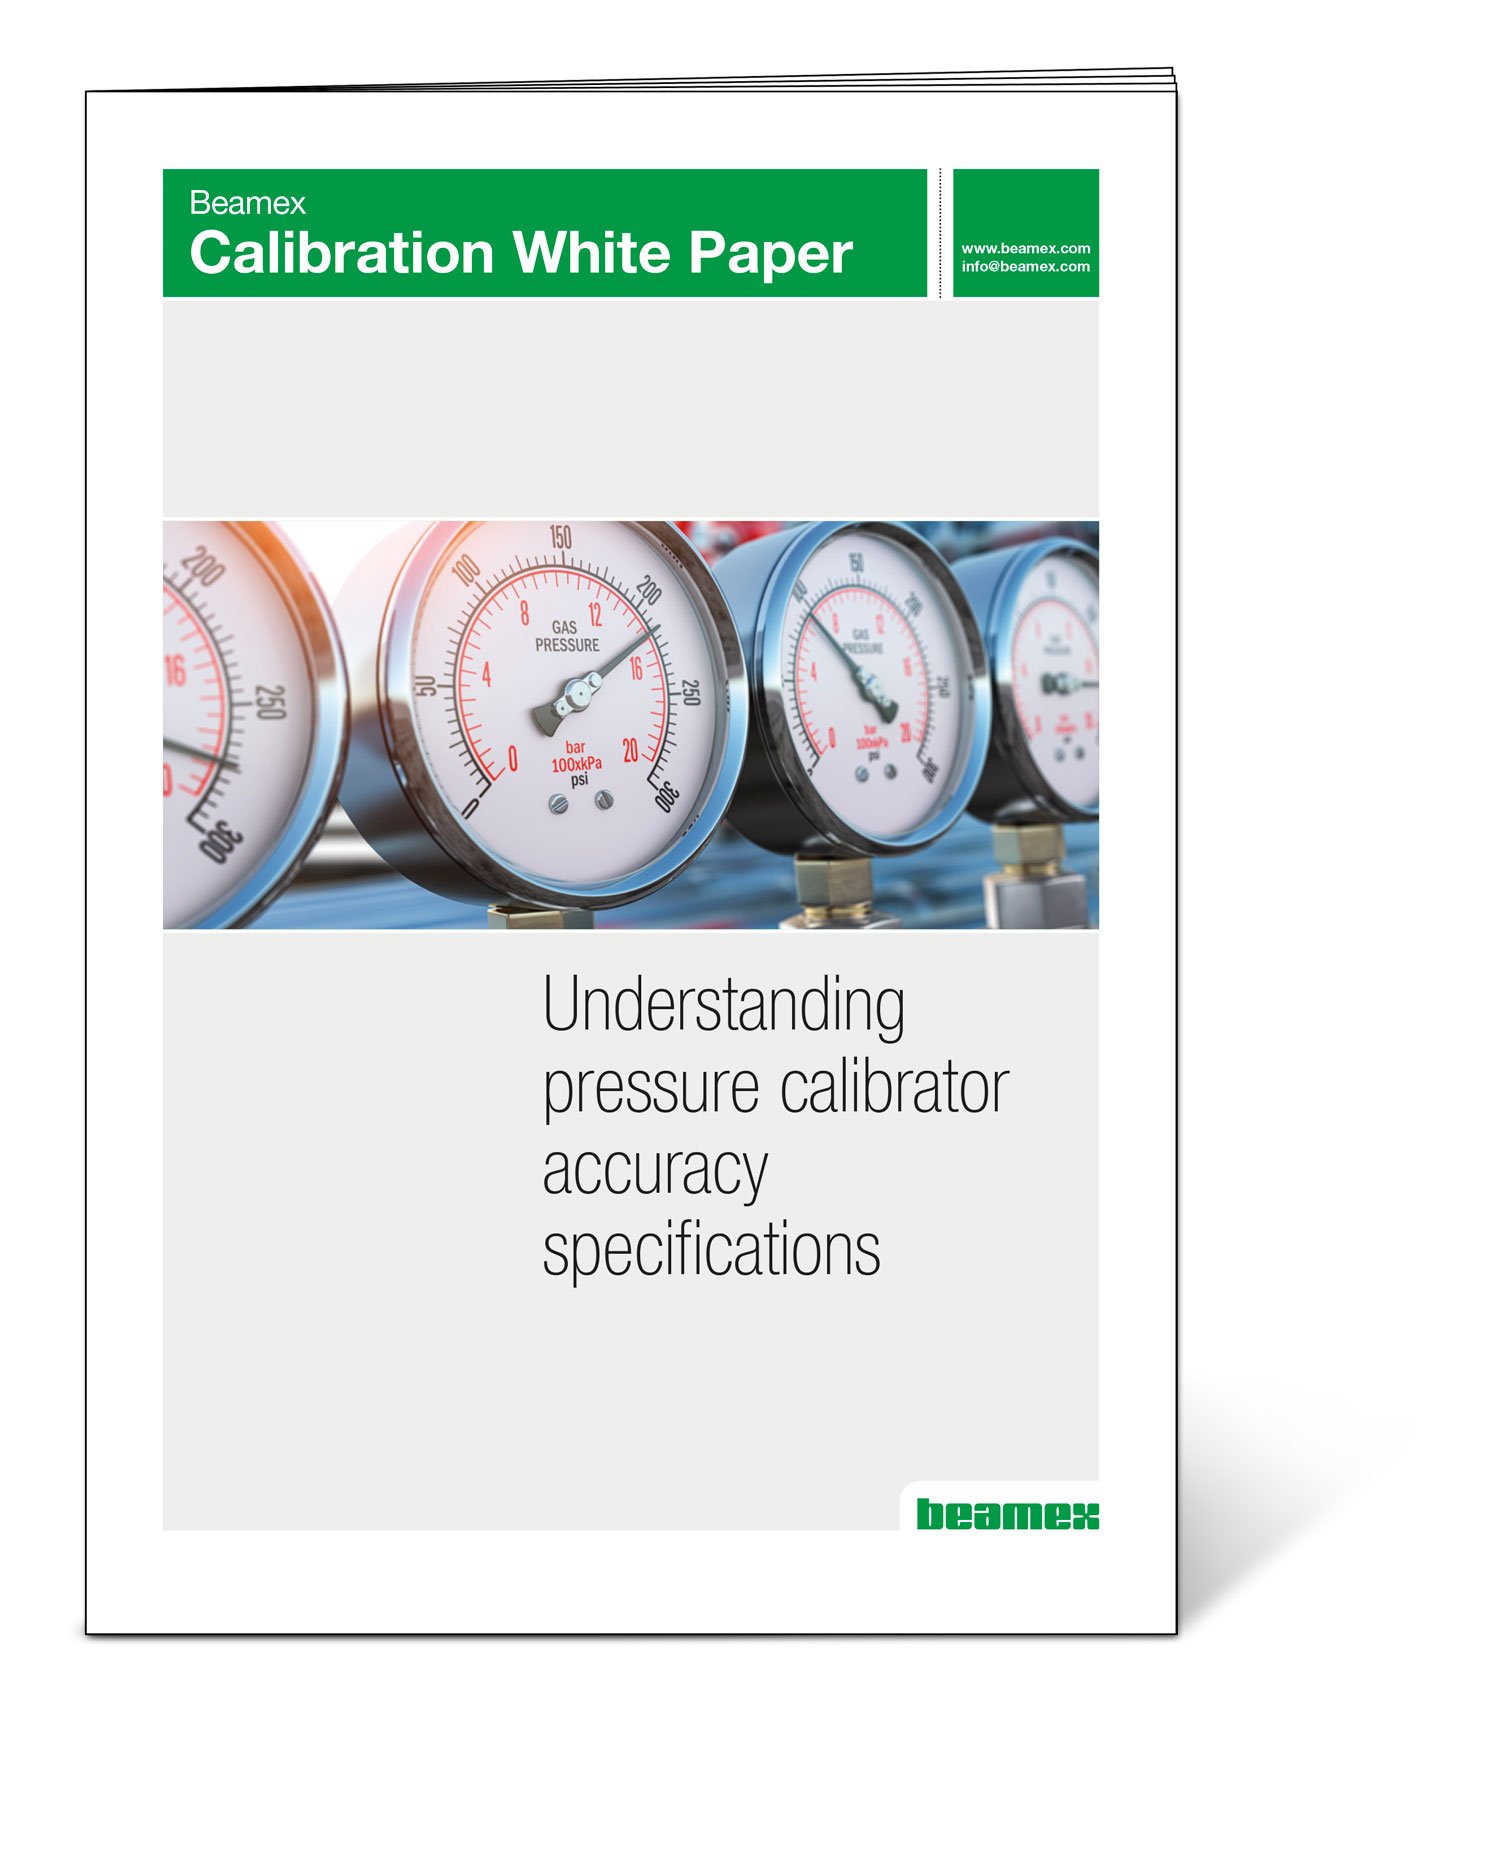 Beamex White Paper - Understanding pressure calibrator accuracy specifications